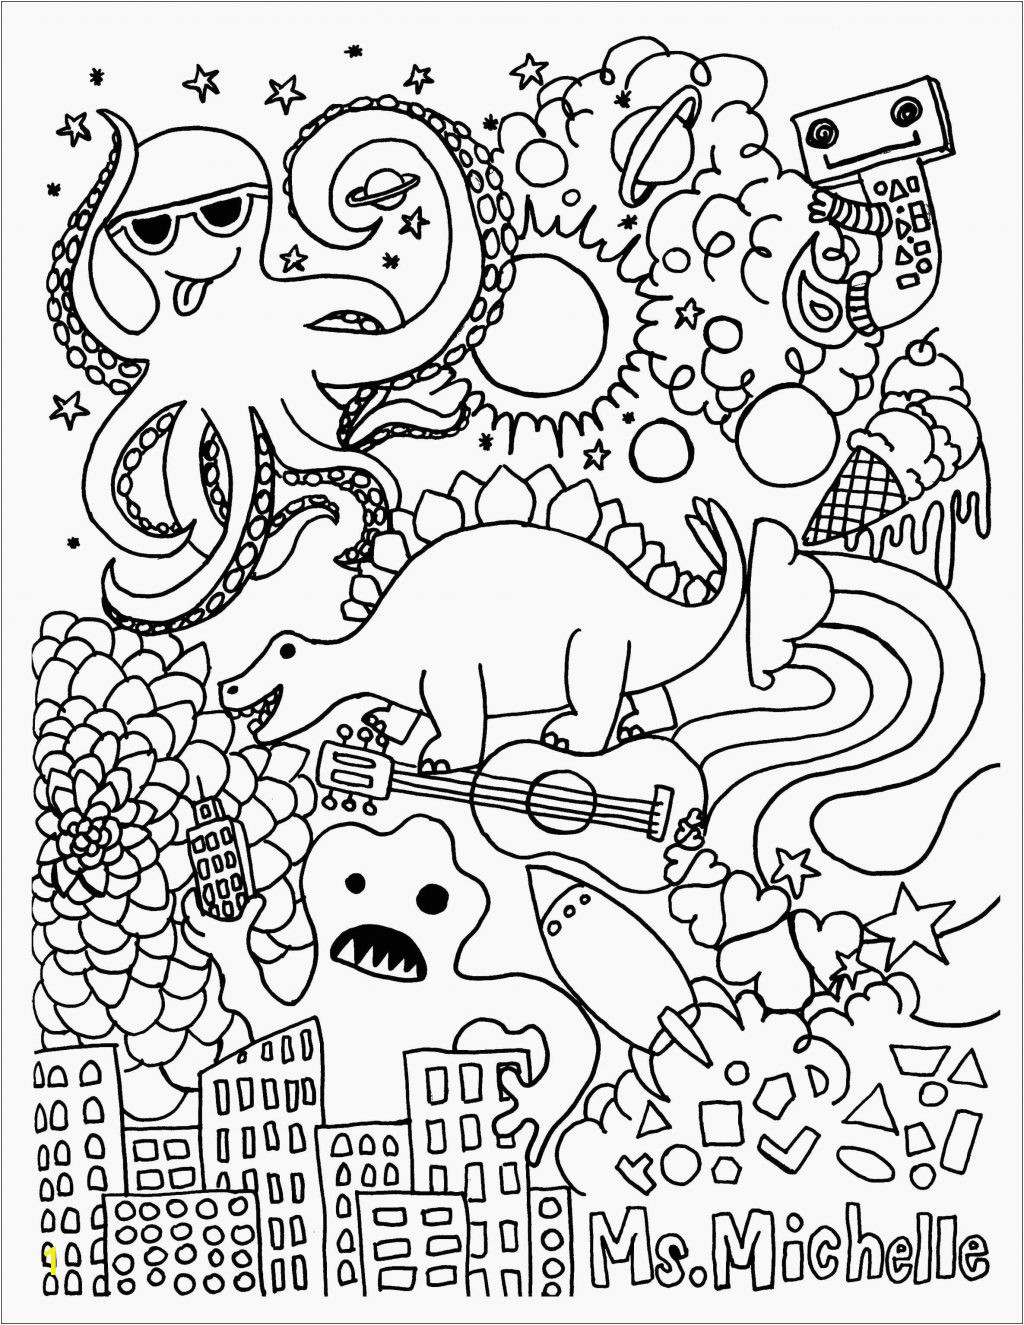 Free Printable Biblical Coloring Pages Coloring Pages Coloring Pages Fall Sheets